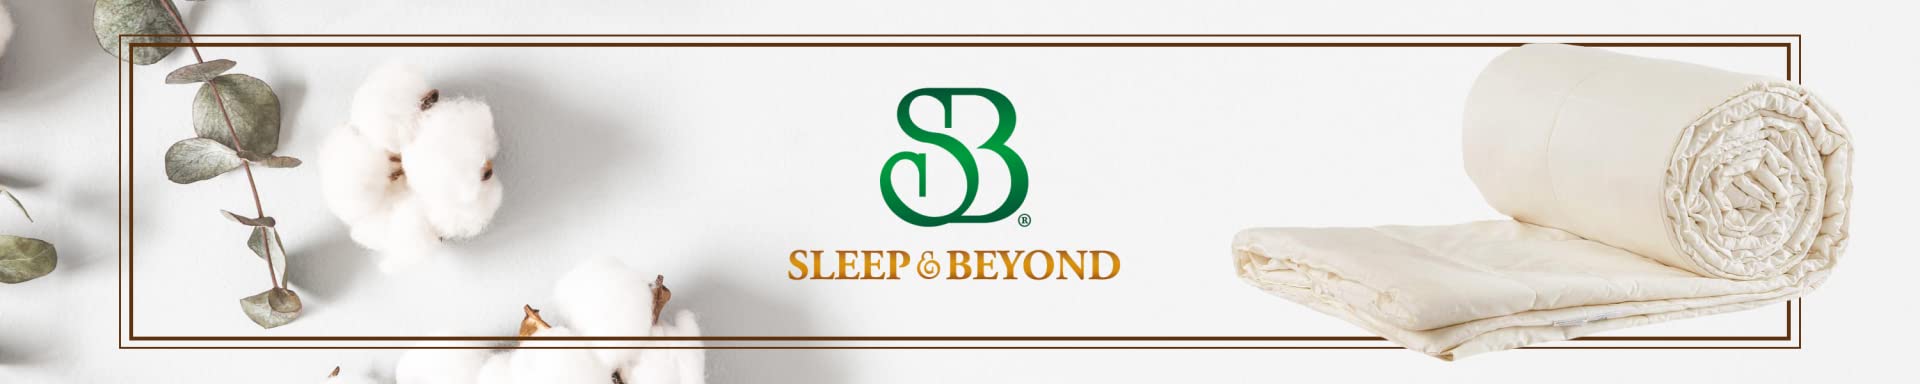 myMerino Collection is available on Amazon | Visit the Sleep & Beyond Store Today!